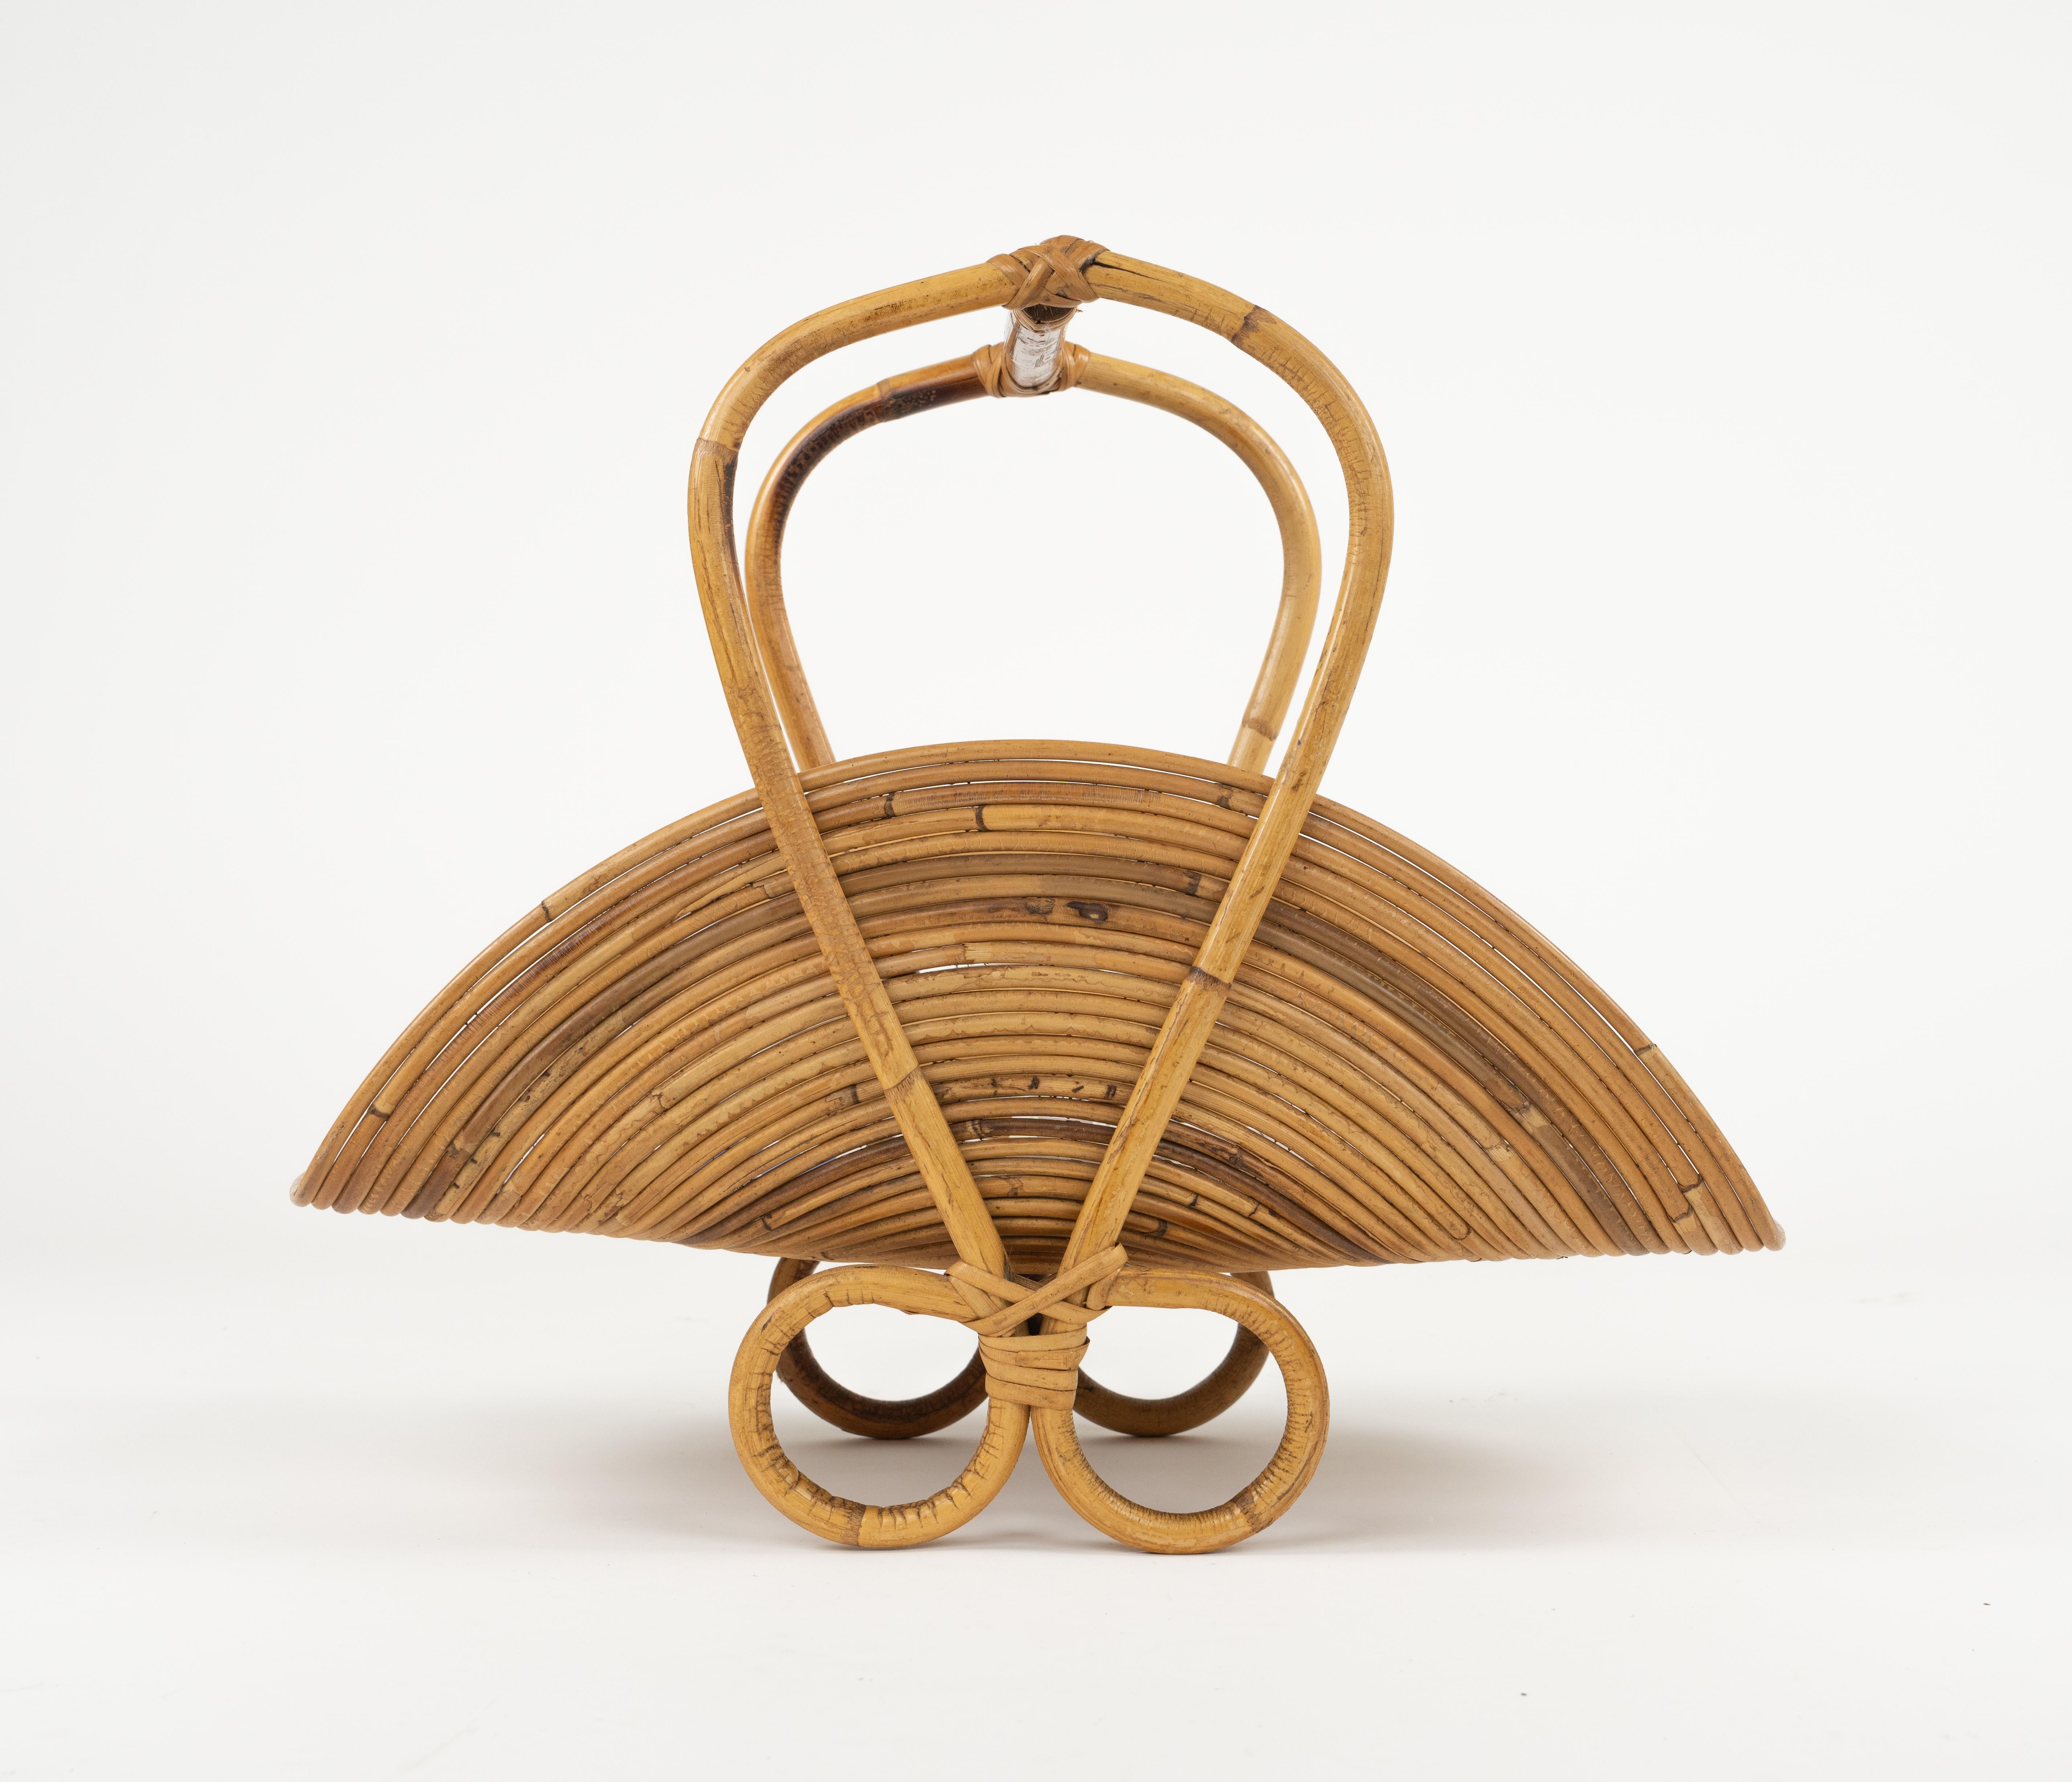 Midcentury Bamboo and Rattan Magazine Rack Vivai Del Sud Style, Italy 1960s For Sale 7